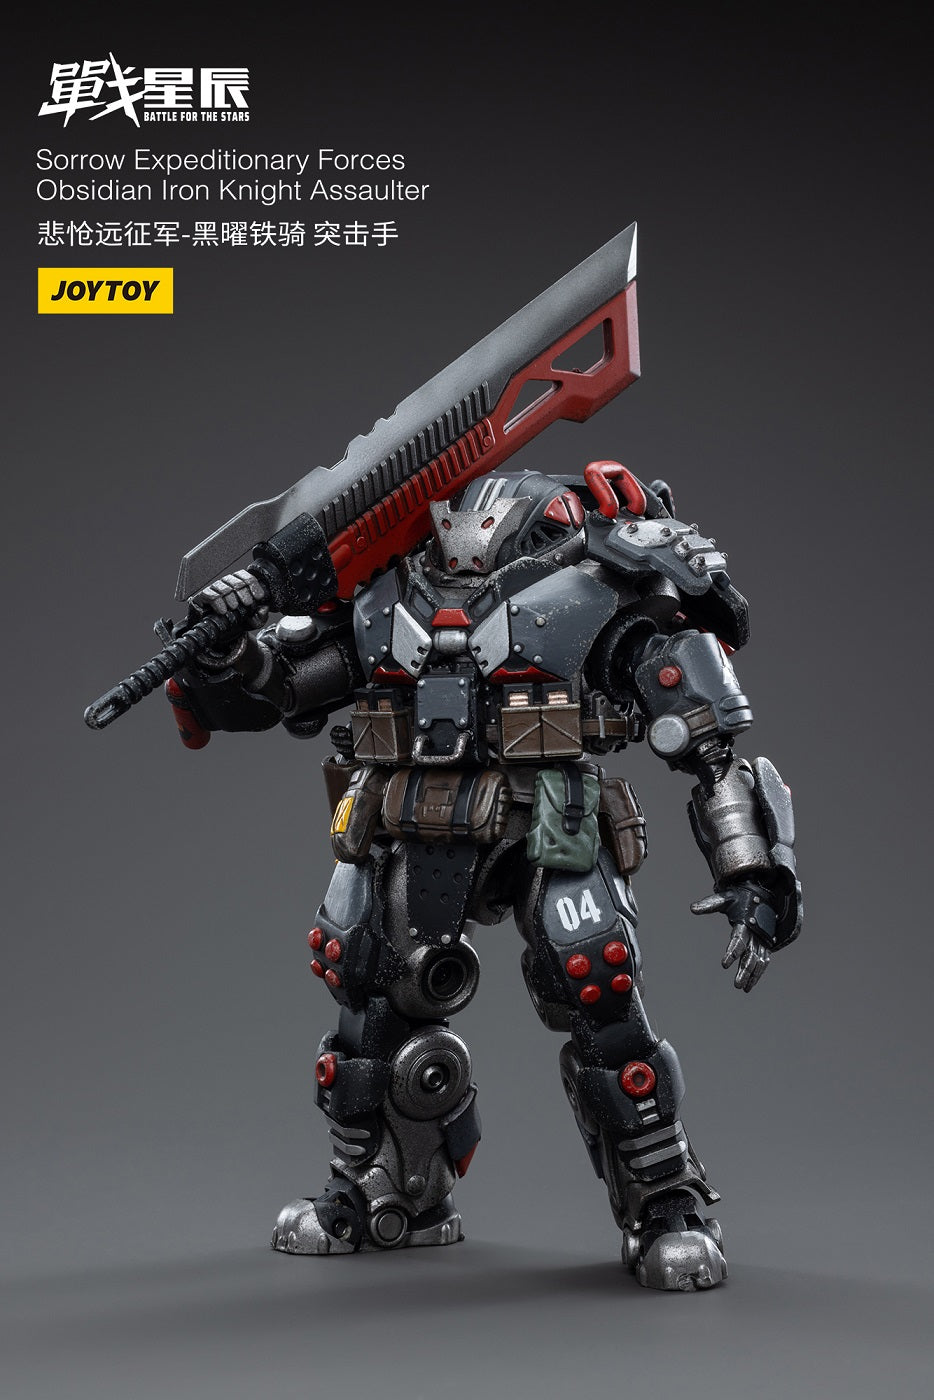 Sorrow Expeditionary Forces Obsidian Iron Knight Assaulter - Action Figure By JOYTOY